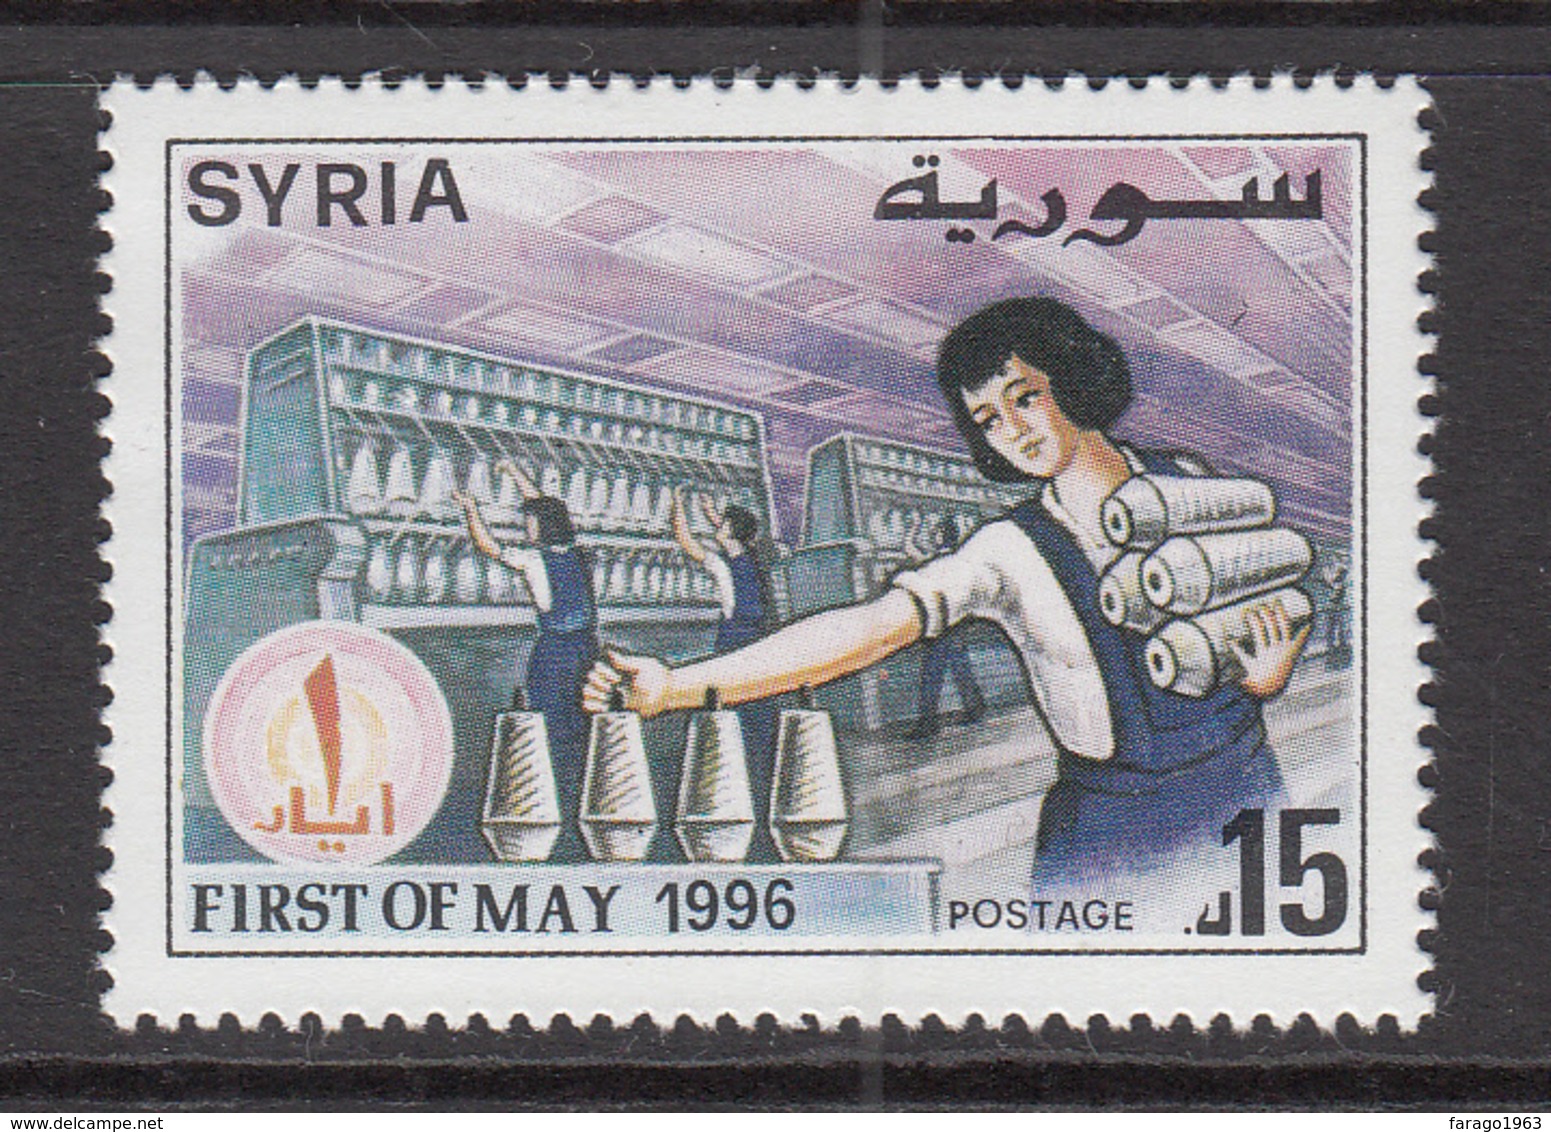 1996 Syria Labour Day Textile Factory Spinning Machines Set Of 1 MNH - Siria